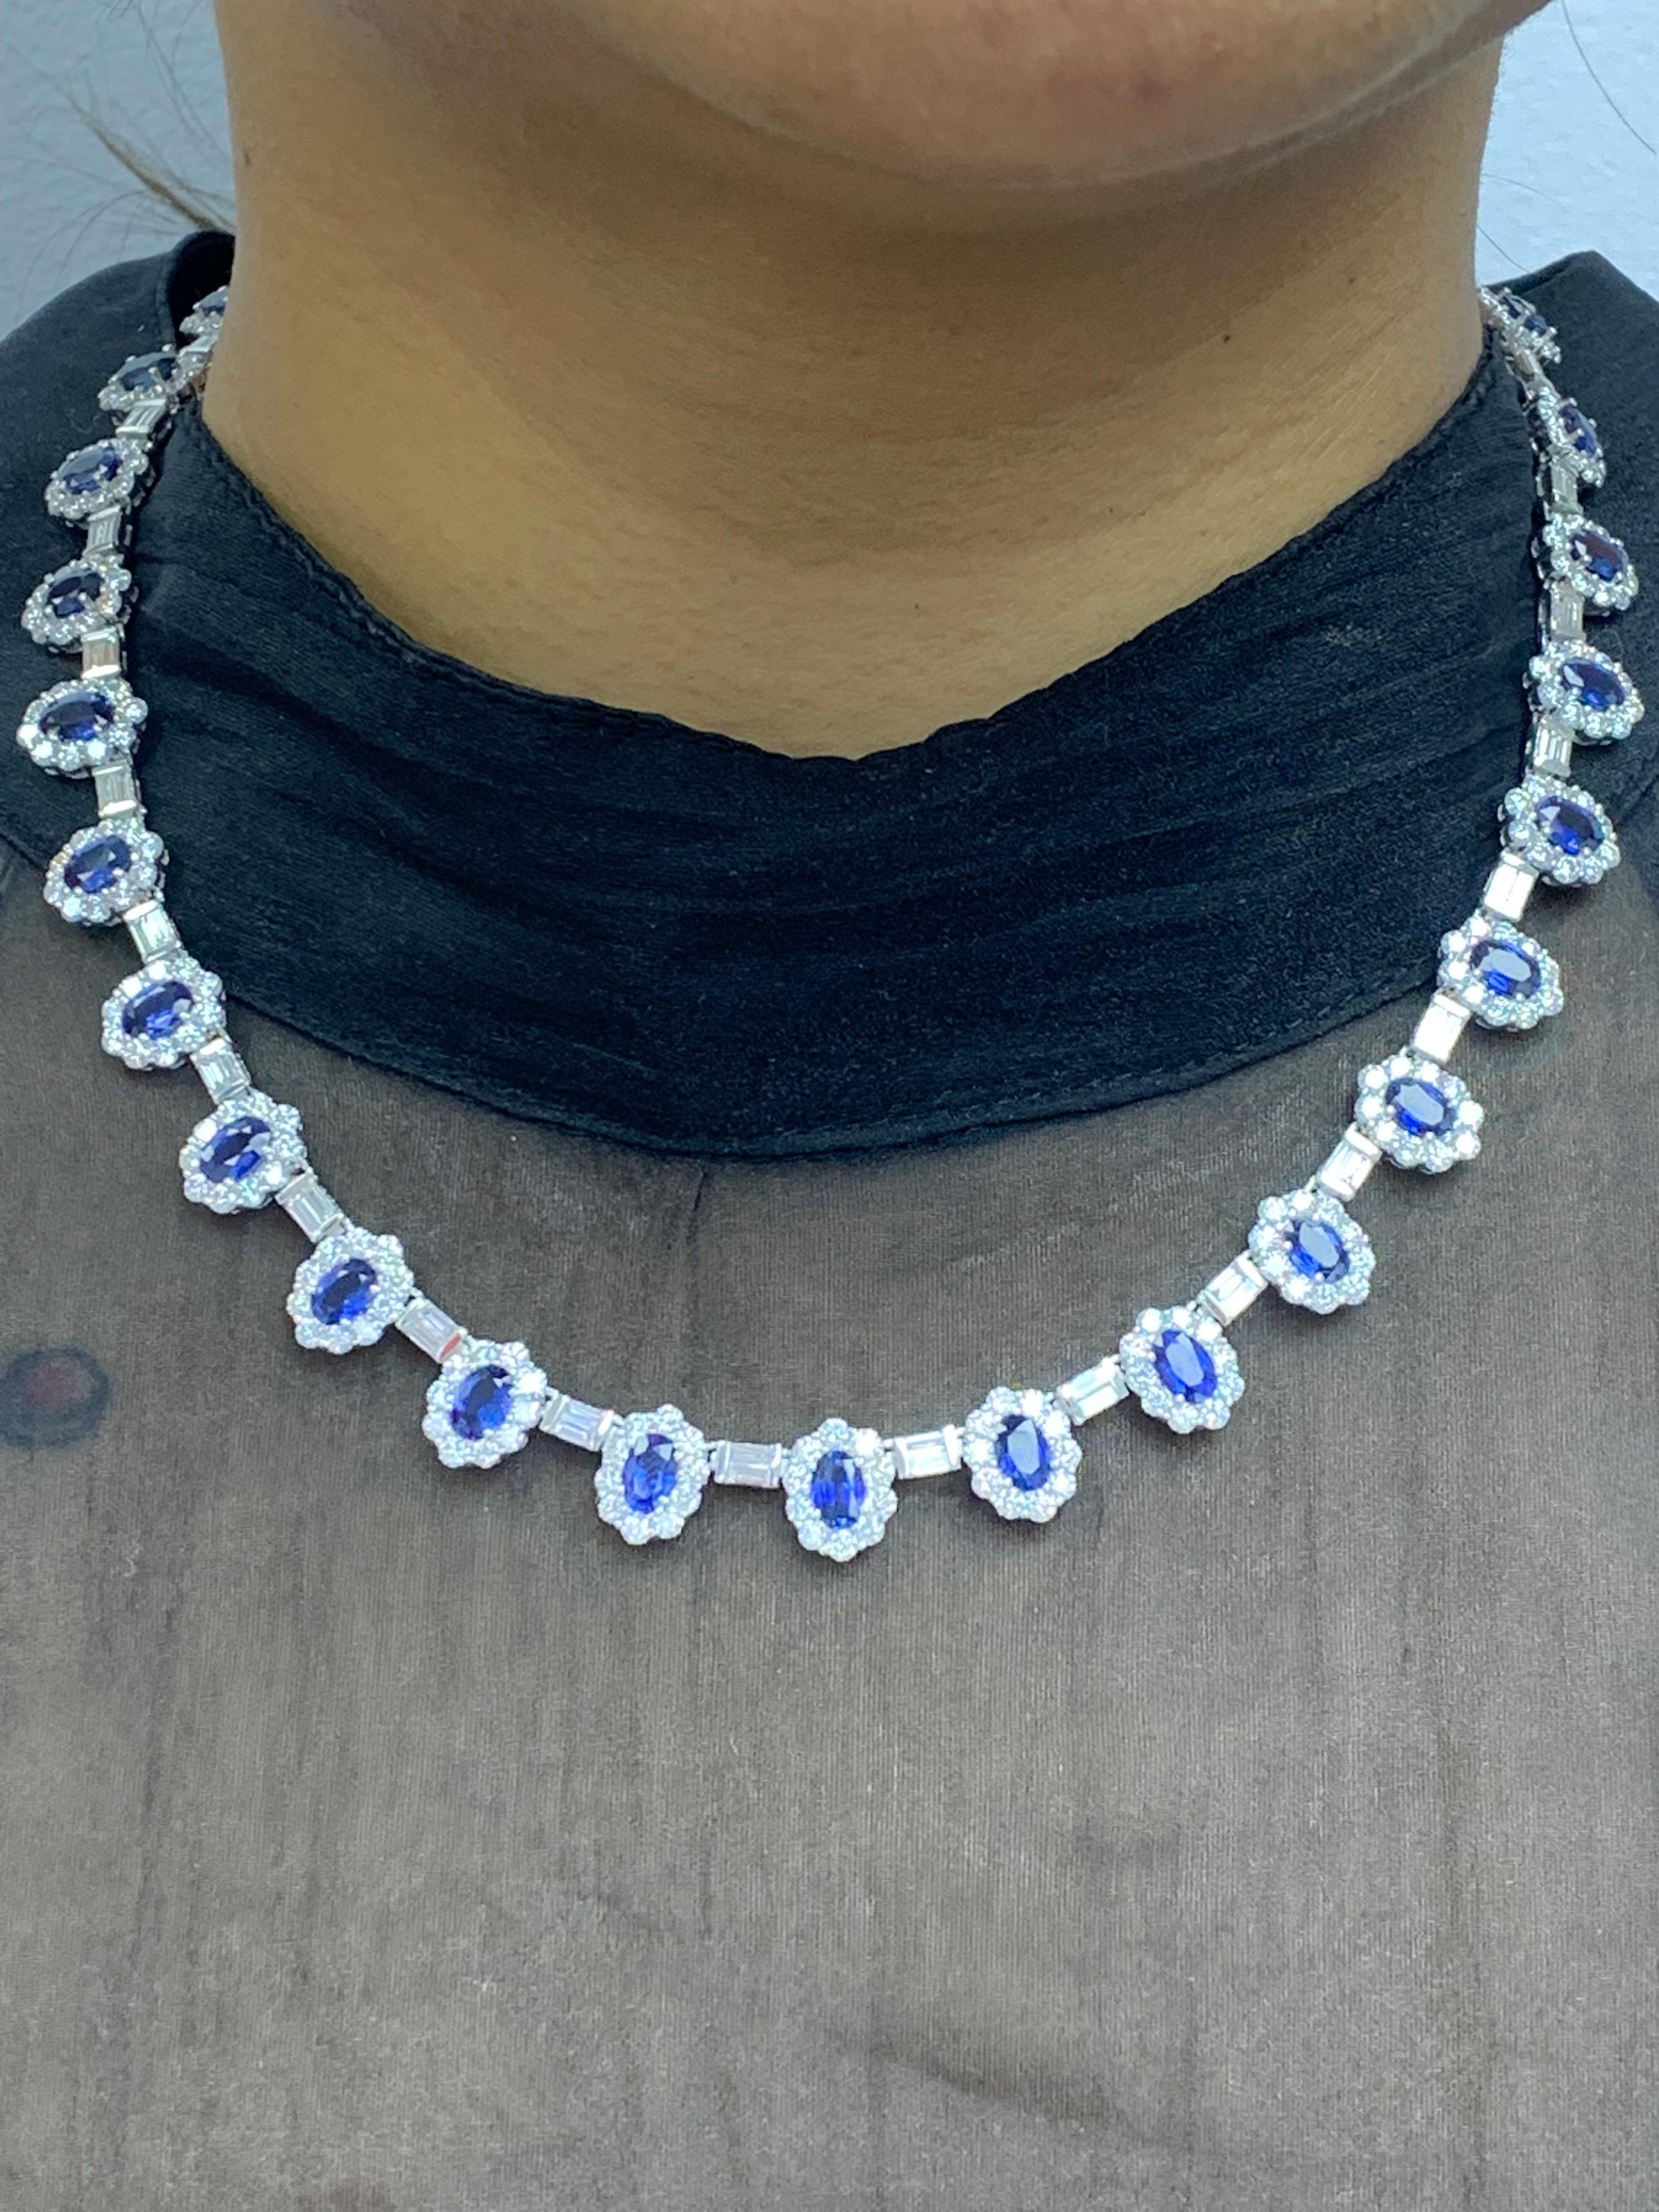 12.74 Carat Oval Cut Blue Sapphire and Diamond Necklace in 18K White Gold For Sale 3